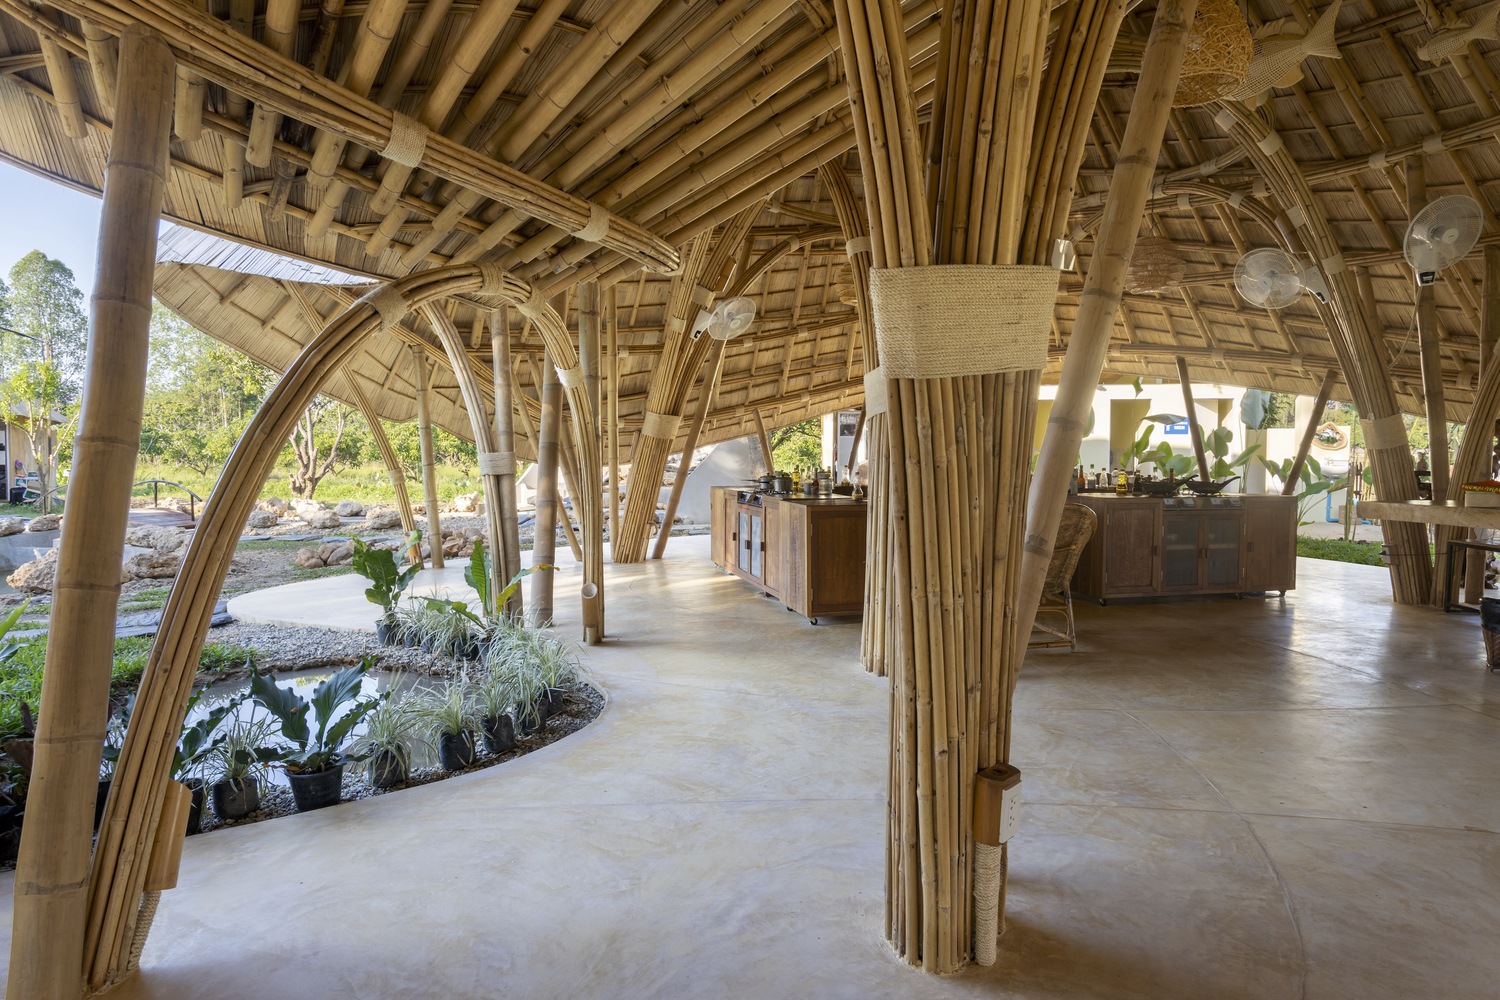 The Bull Cooking School interior. Photo from Chiangmai Life Architects.